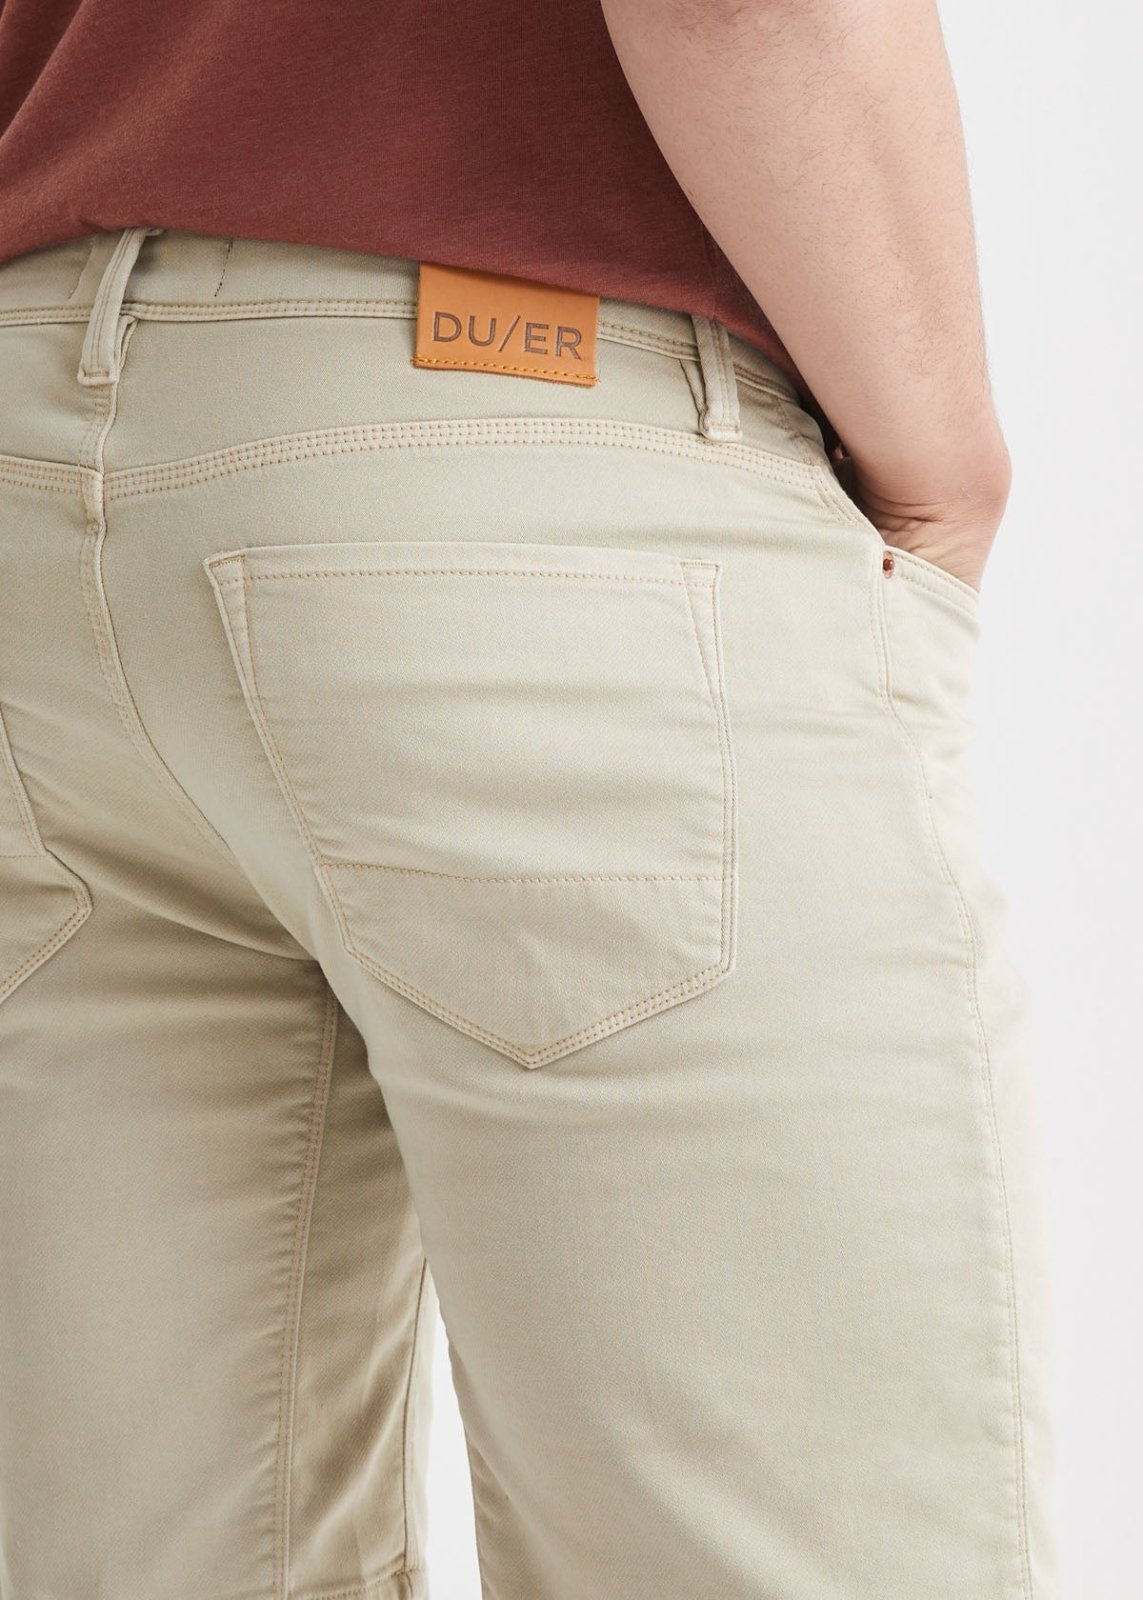 mens off-white relaxed fit performance stretch short back waistband